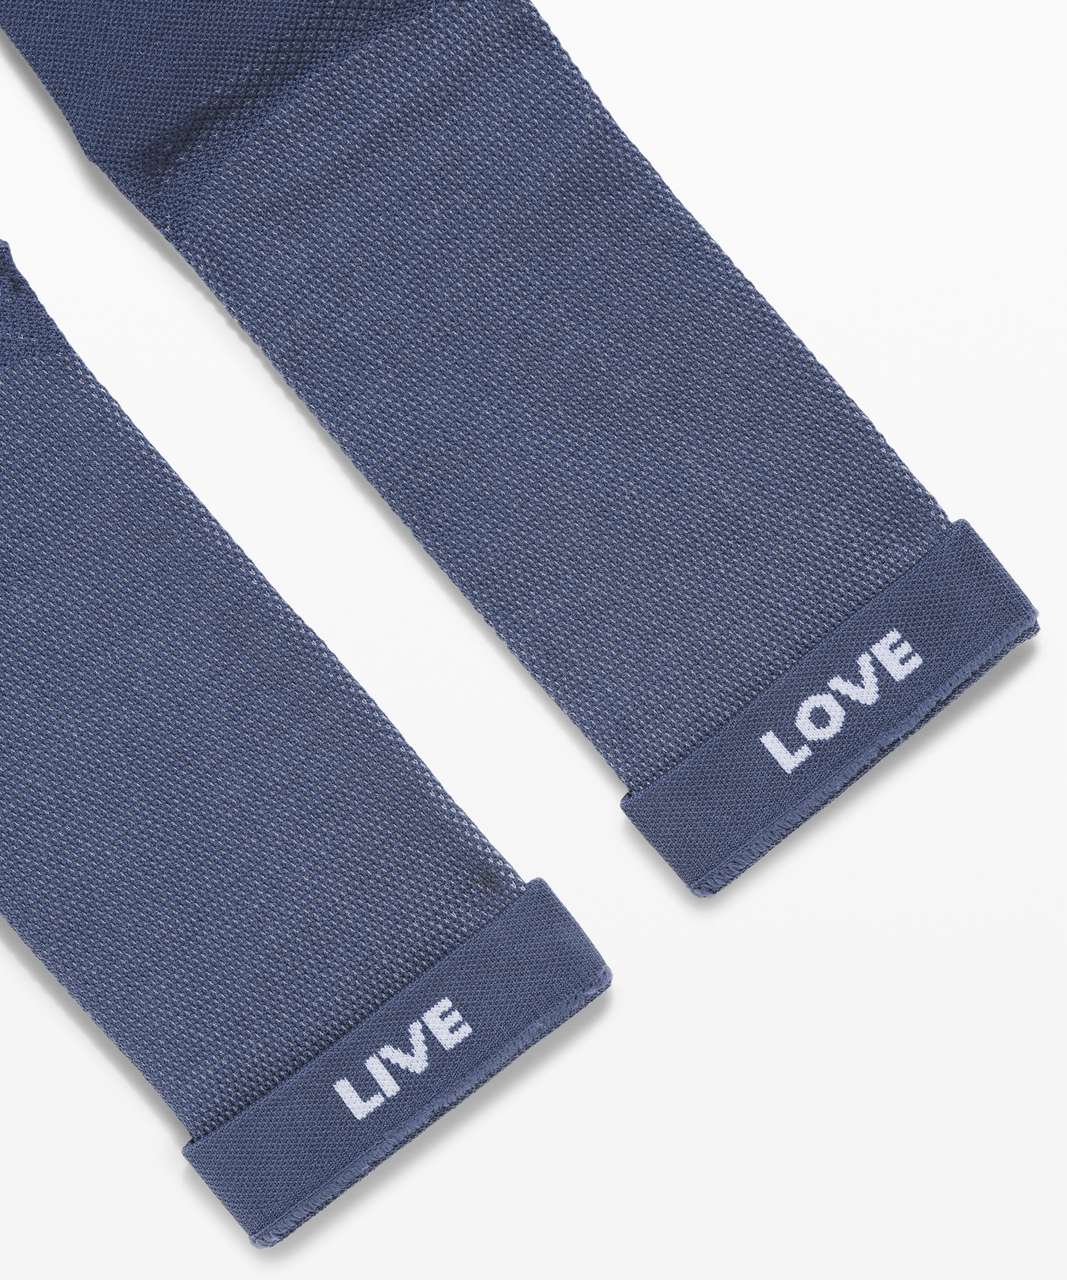 Lululemon Take Me There Crew Sock - Ink Blue